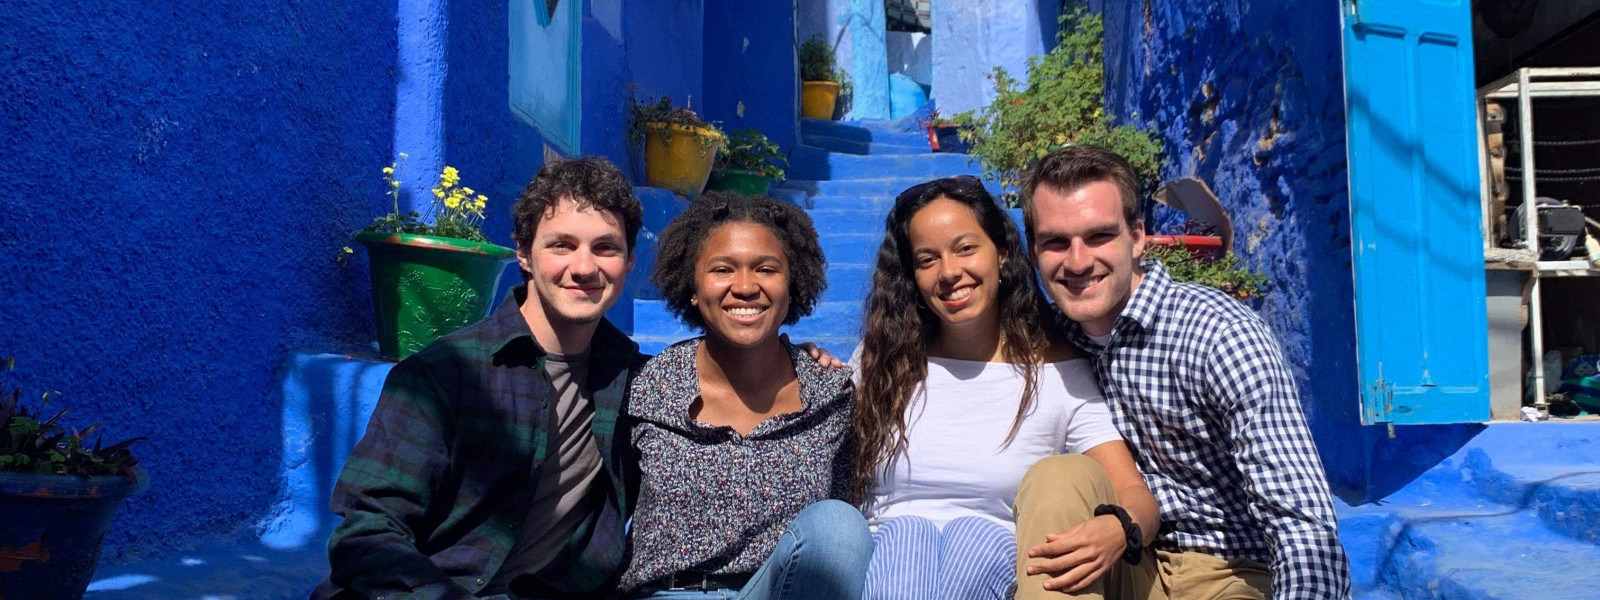 Four students pose for a photo while sitting close together on steps.